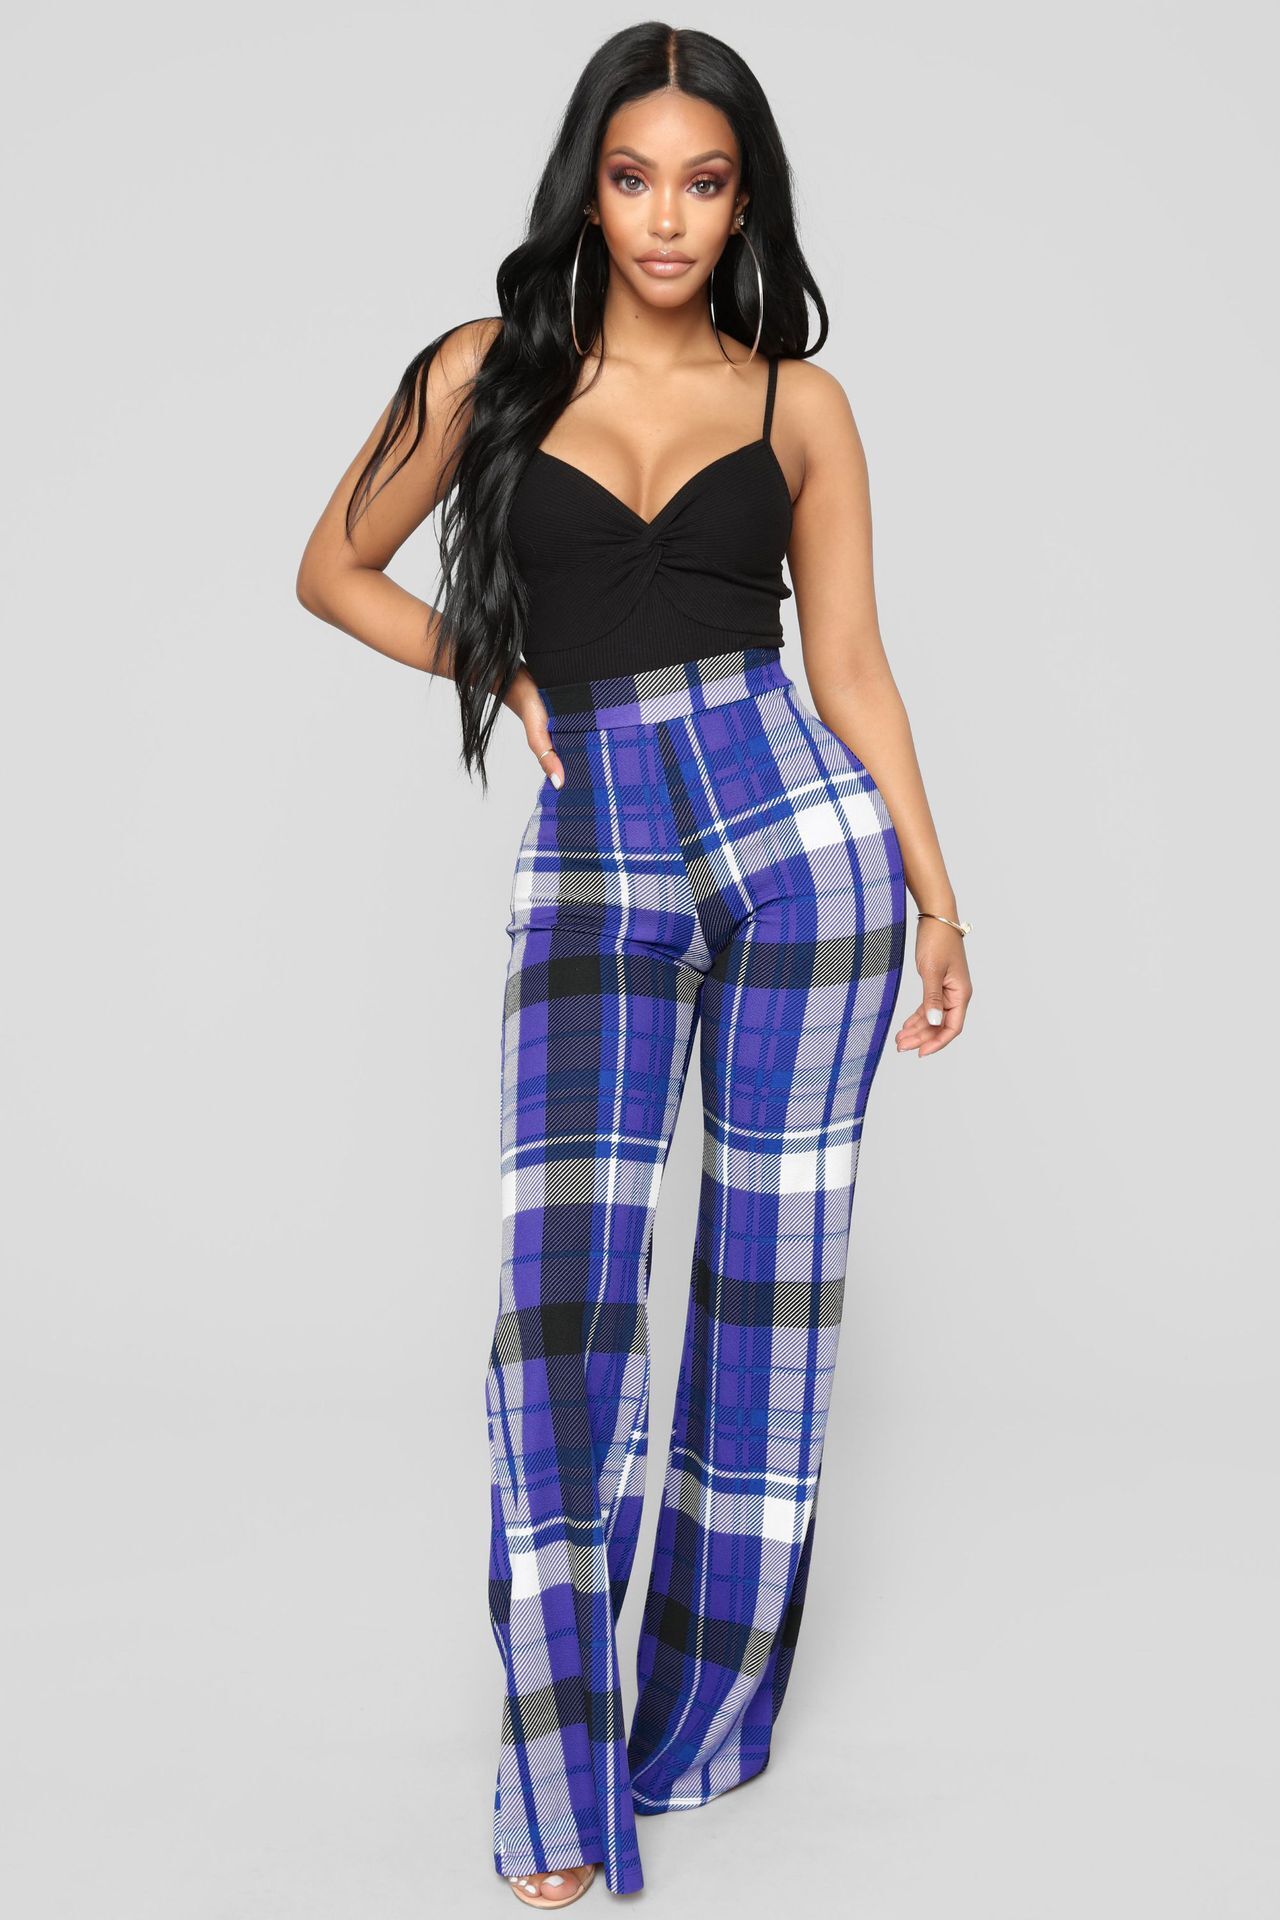 Unlimon's New Fashion Three Color Checkered Printed Wide Leg Pants Women's Casual Pants D01511